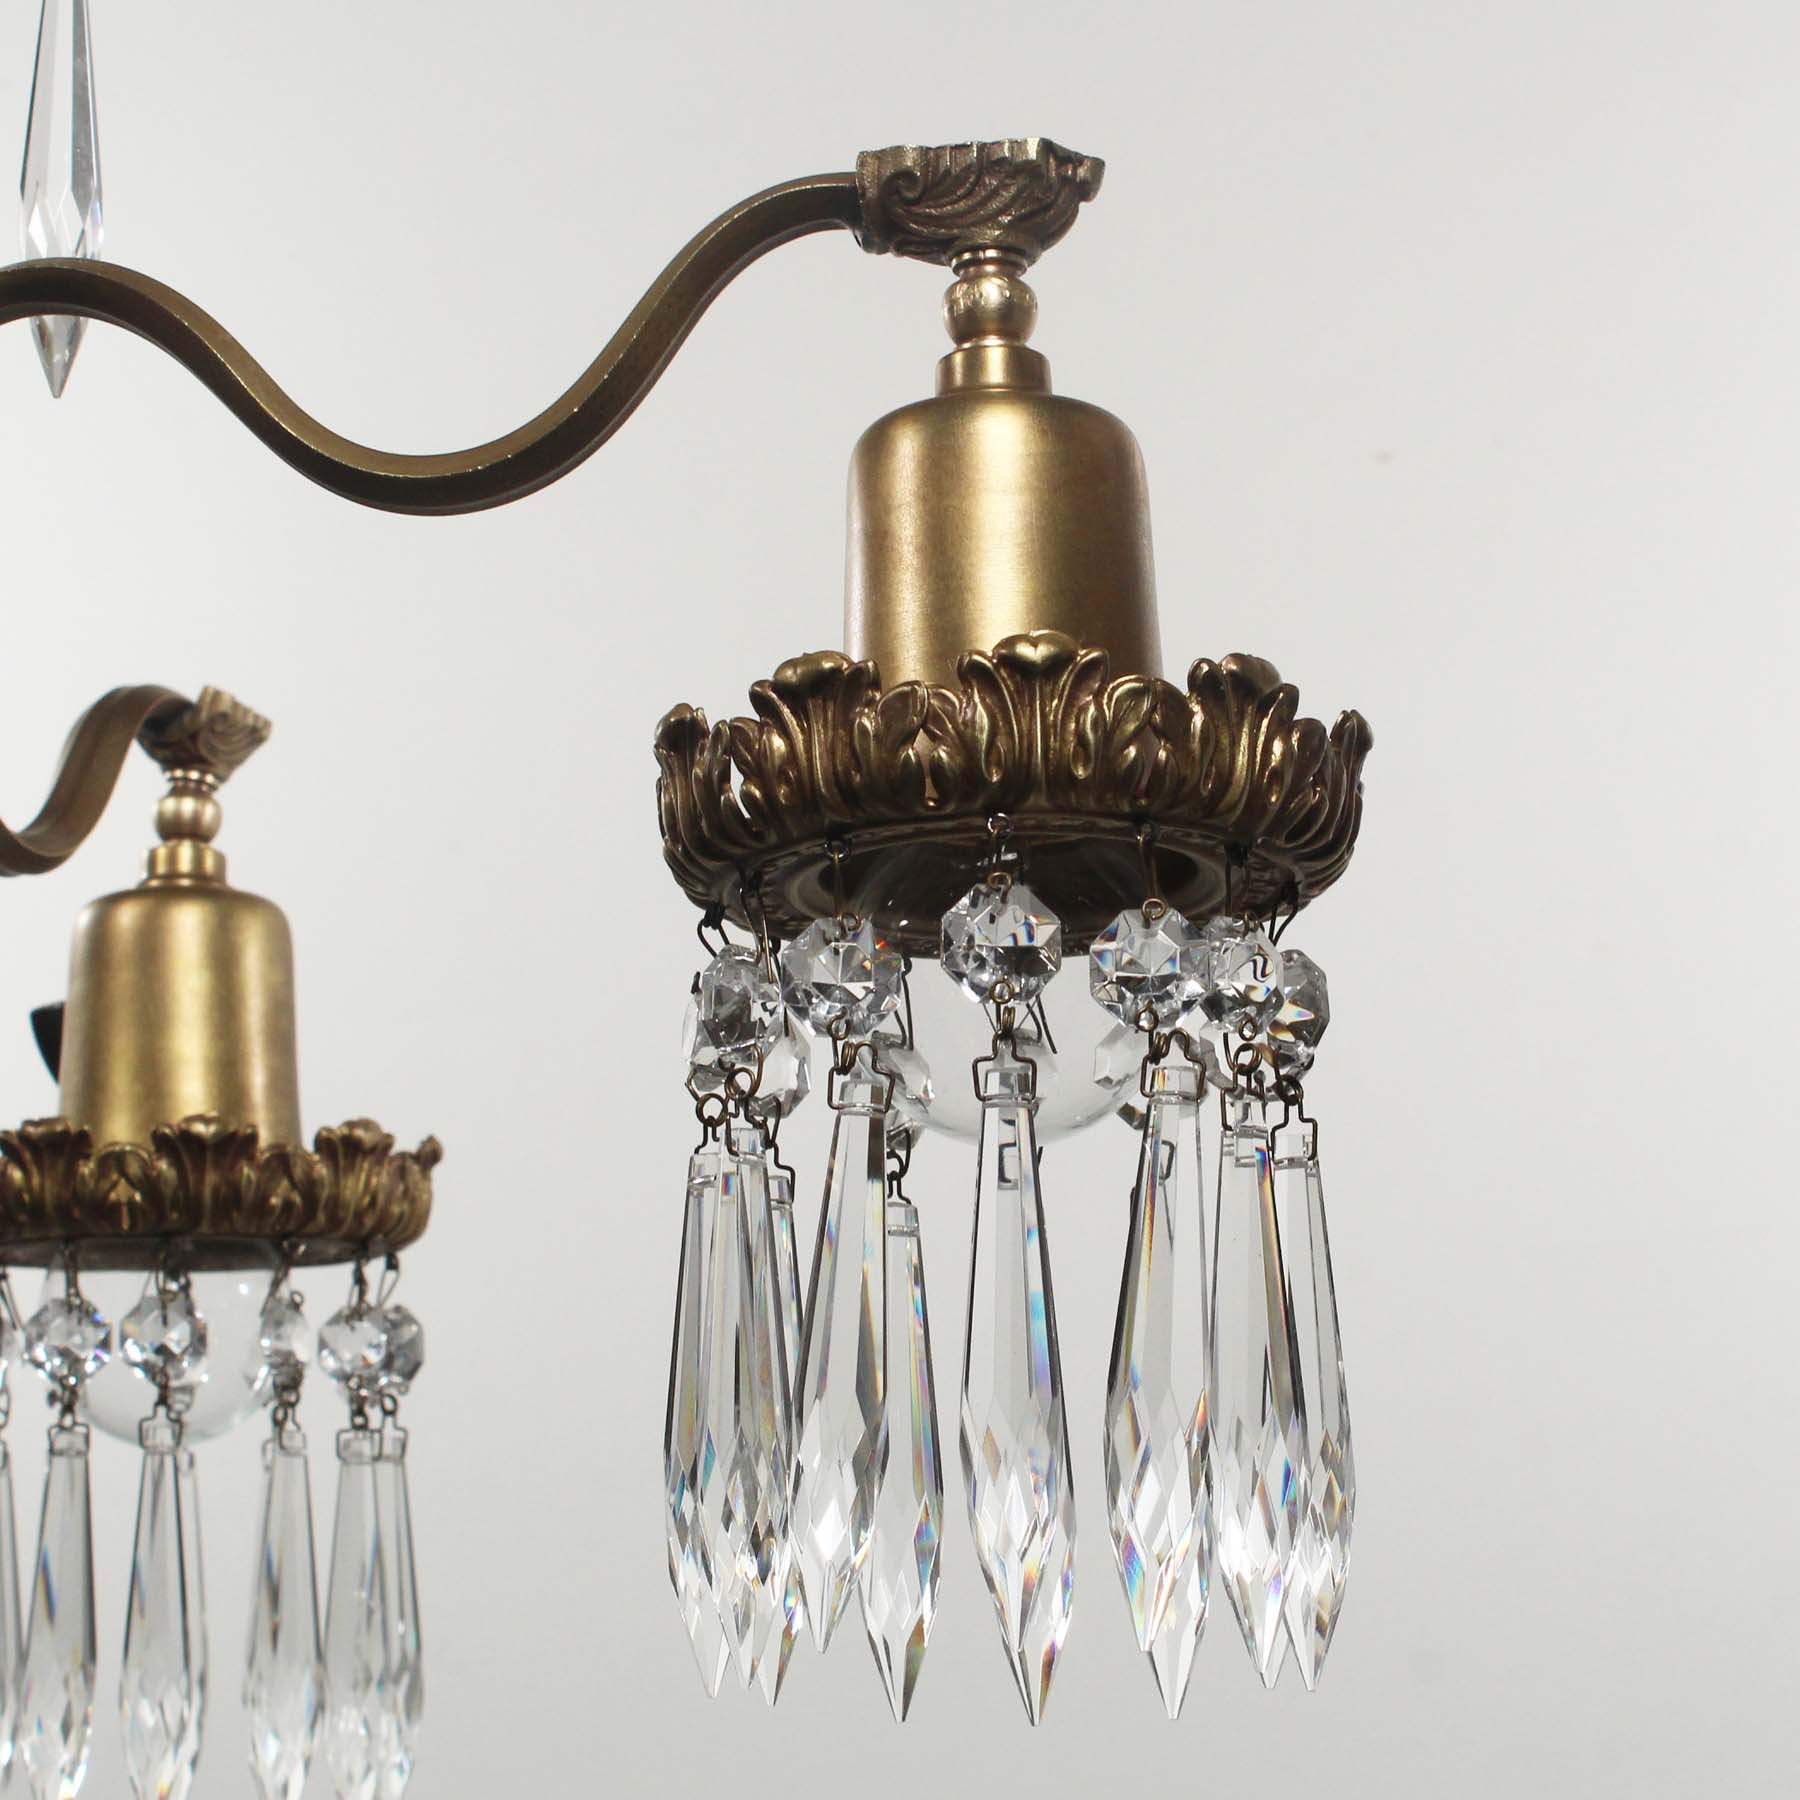 SOLD Neoclassical Chandelier with Prisms, Antique Lighting-67446